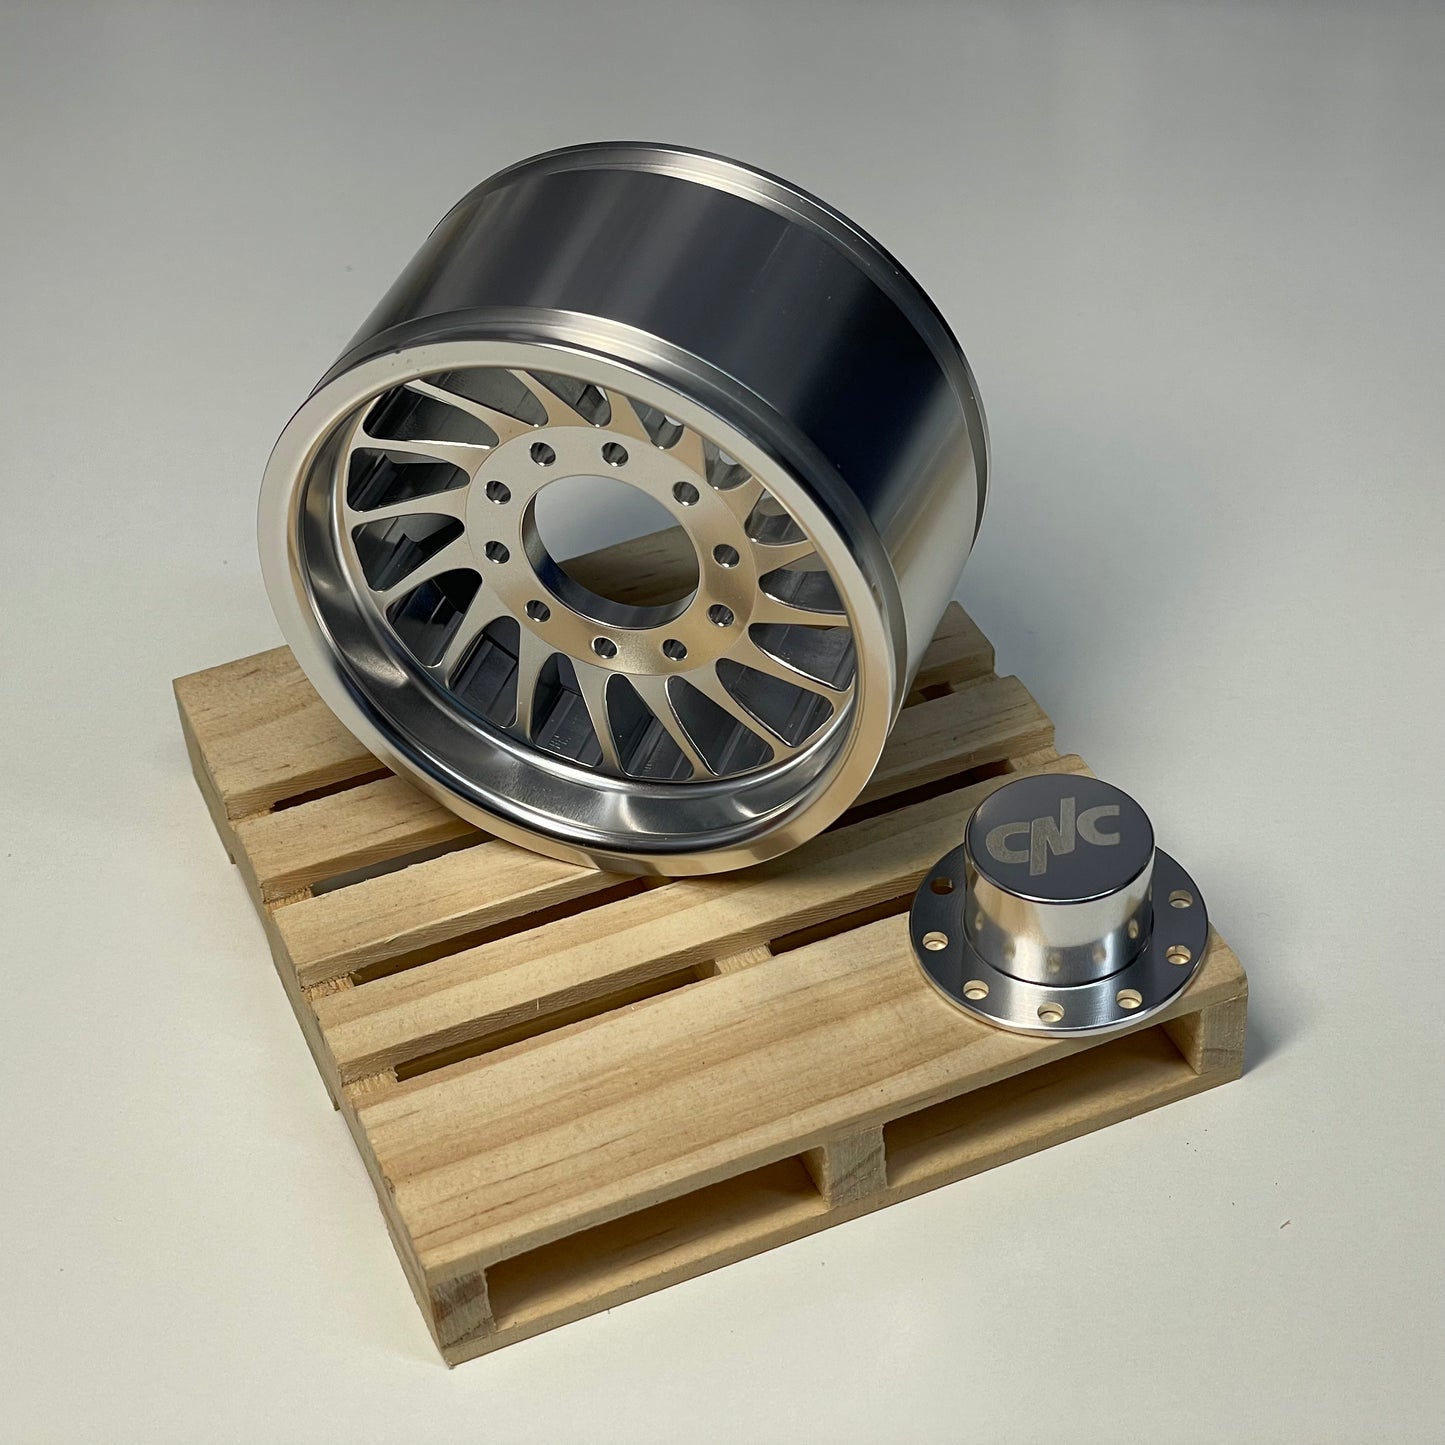 "Brodoz" Super Single Front and Dually Rear Directional Aluminum Billet Wheels: Comes as a Compete Set for the CEN F450